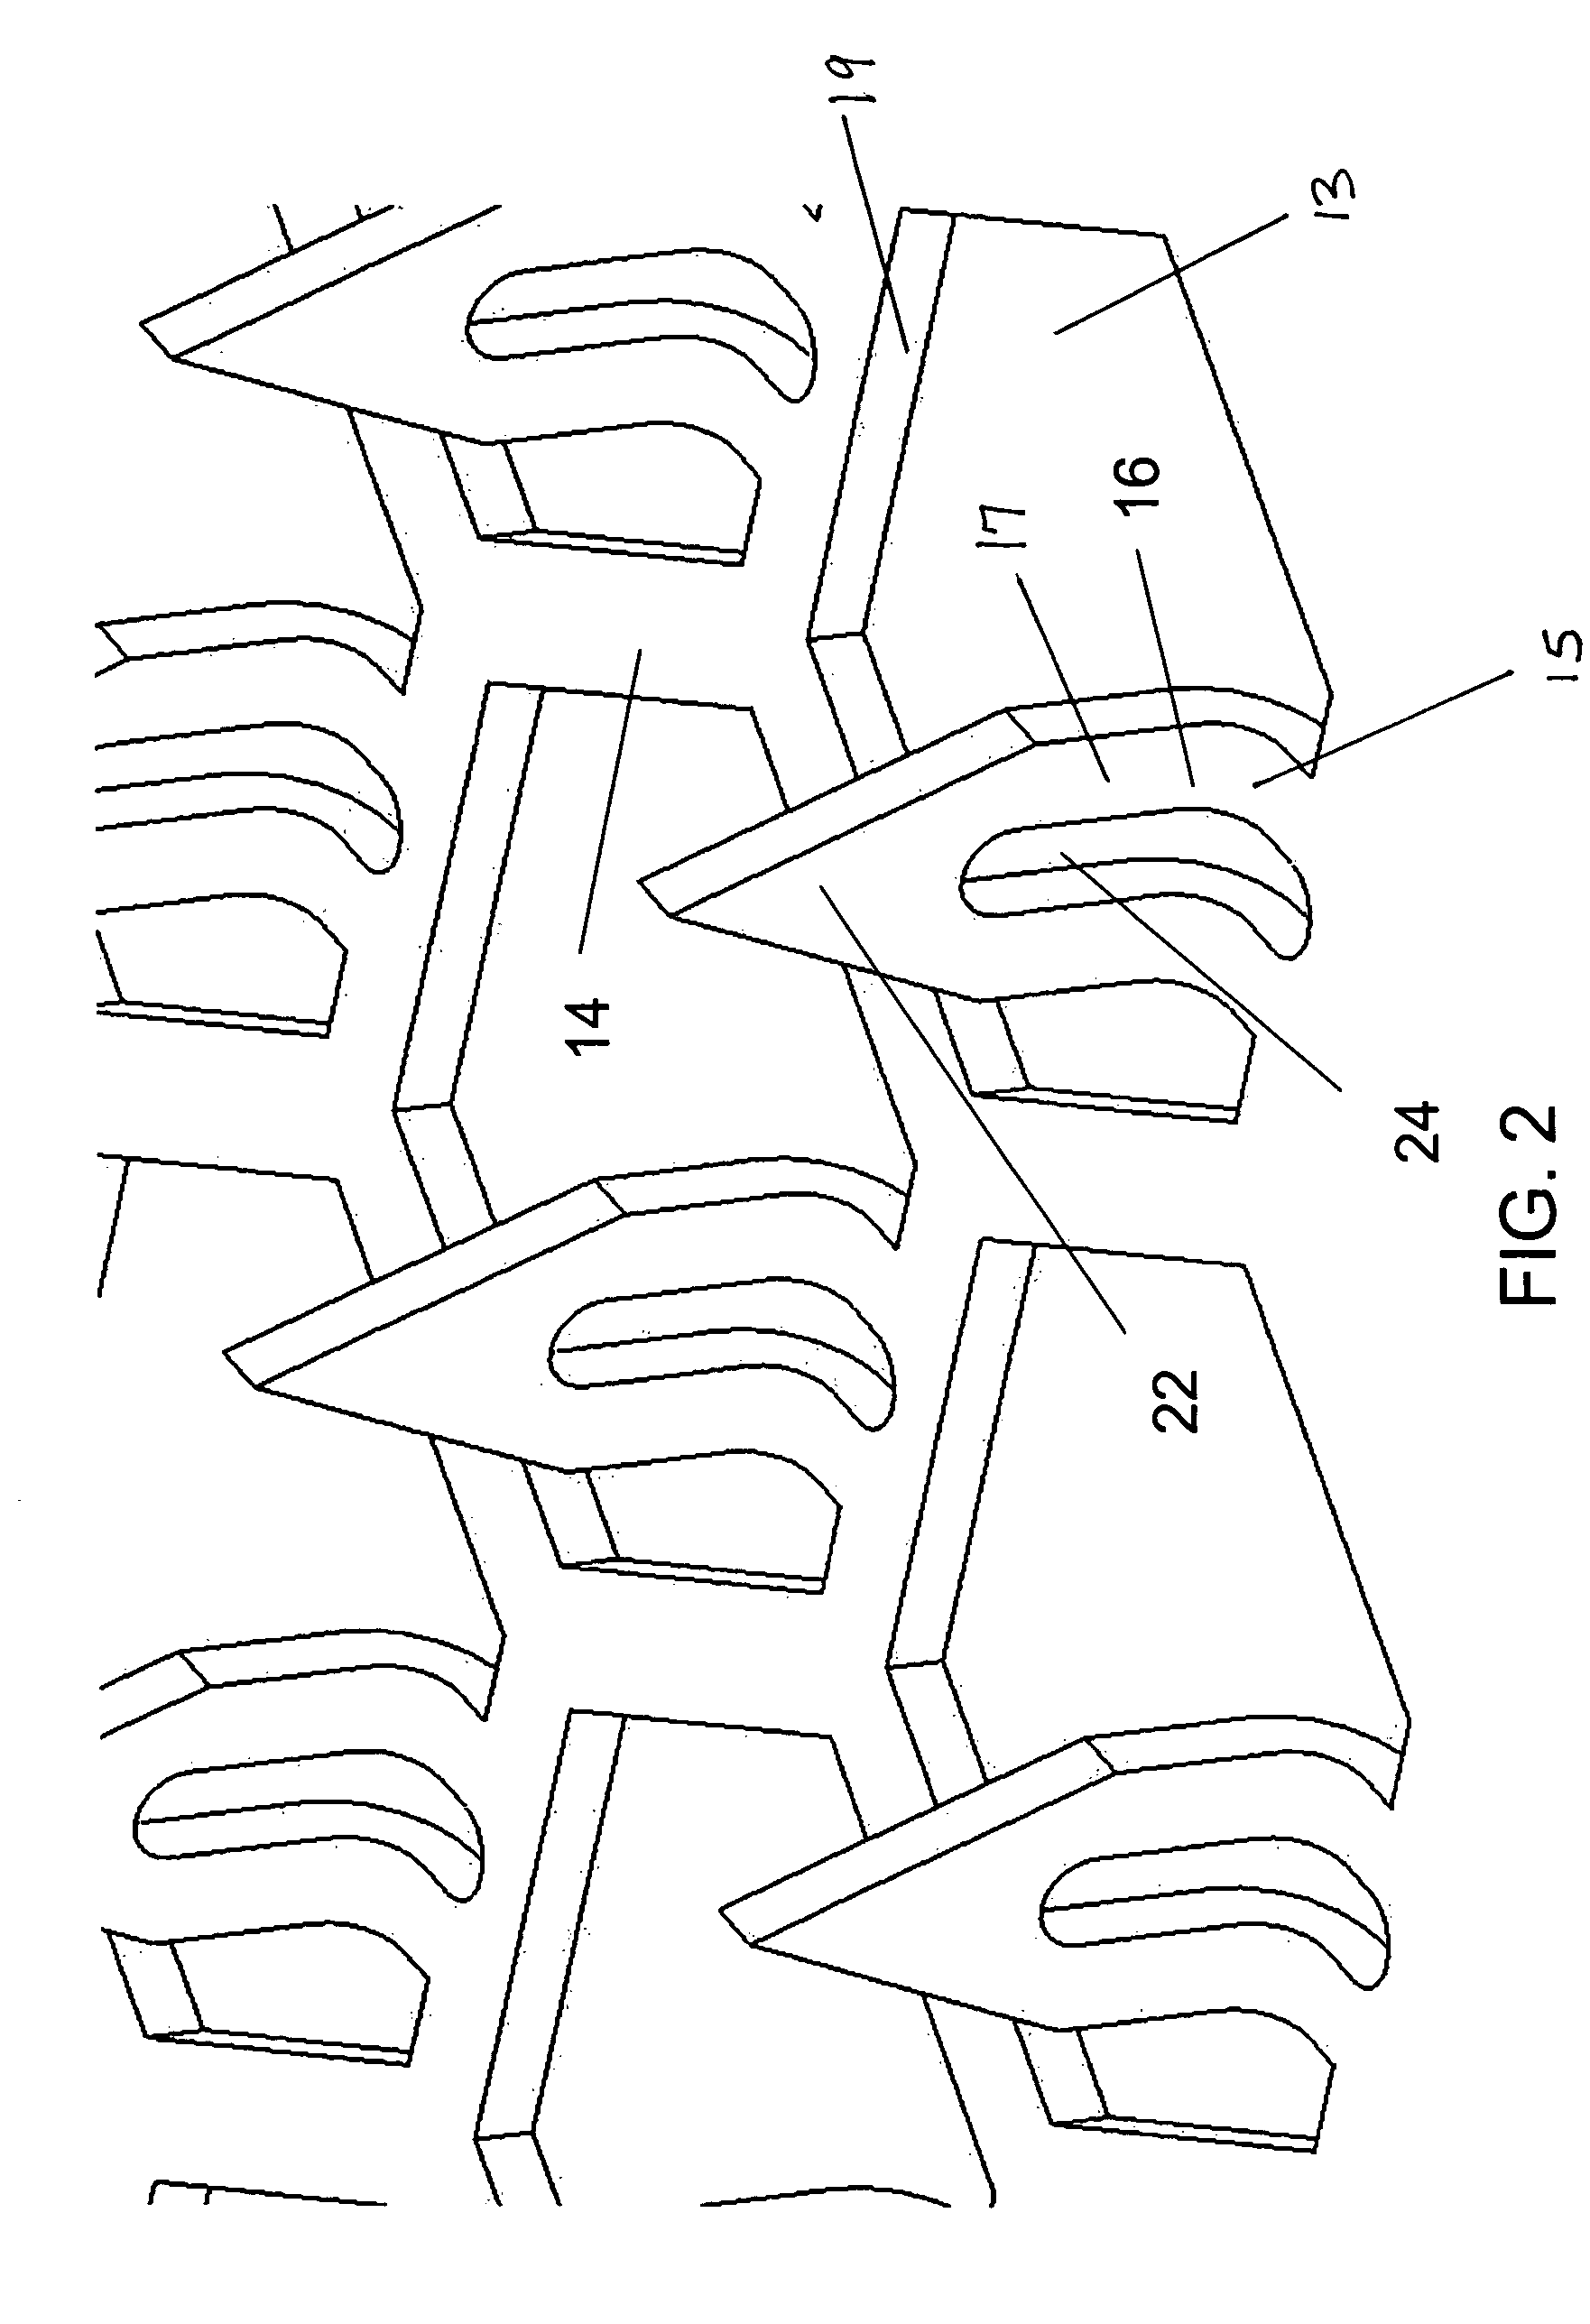 Microneedle array, patch, and applicator for transdermal drug delivery